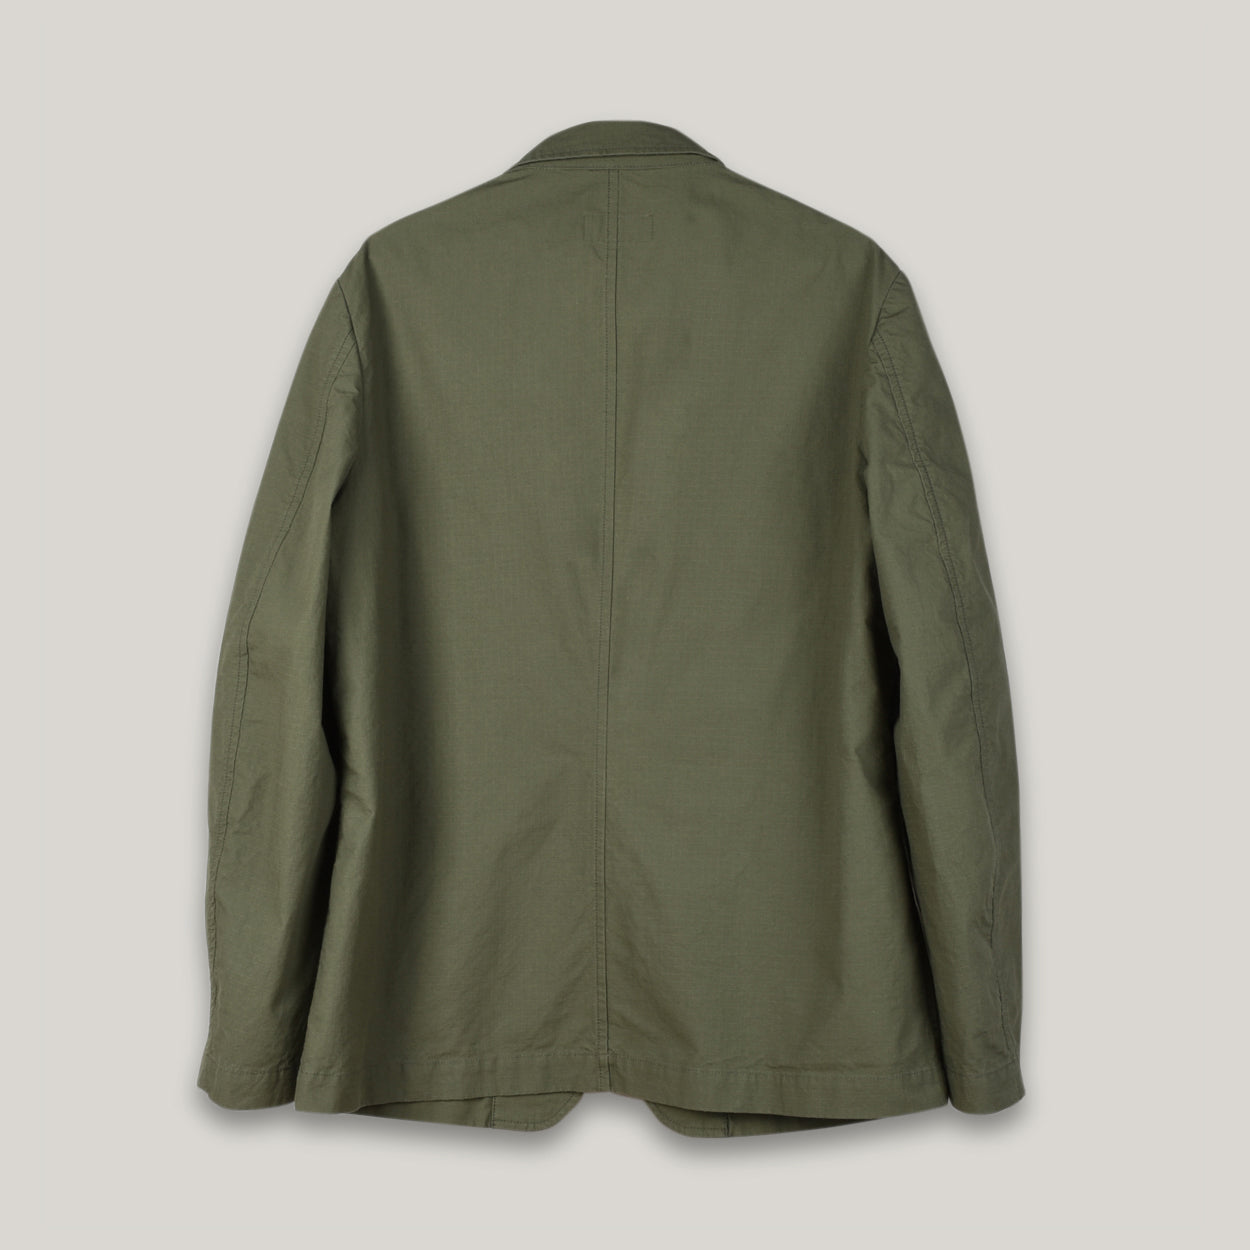 1ST PAT-RN GREENWICH JACKET - MILITARY RIPSTOP